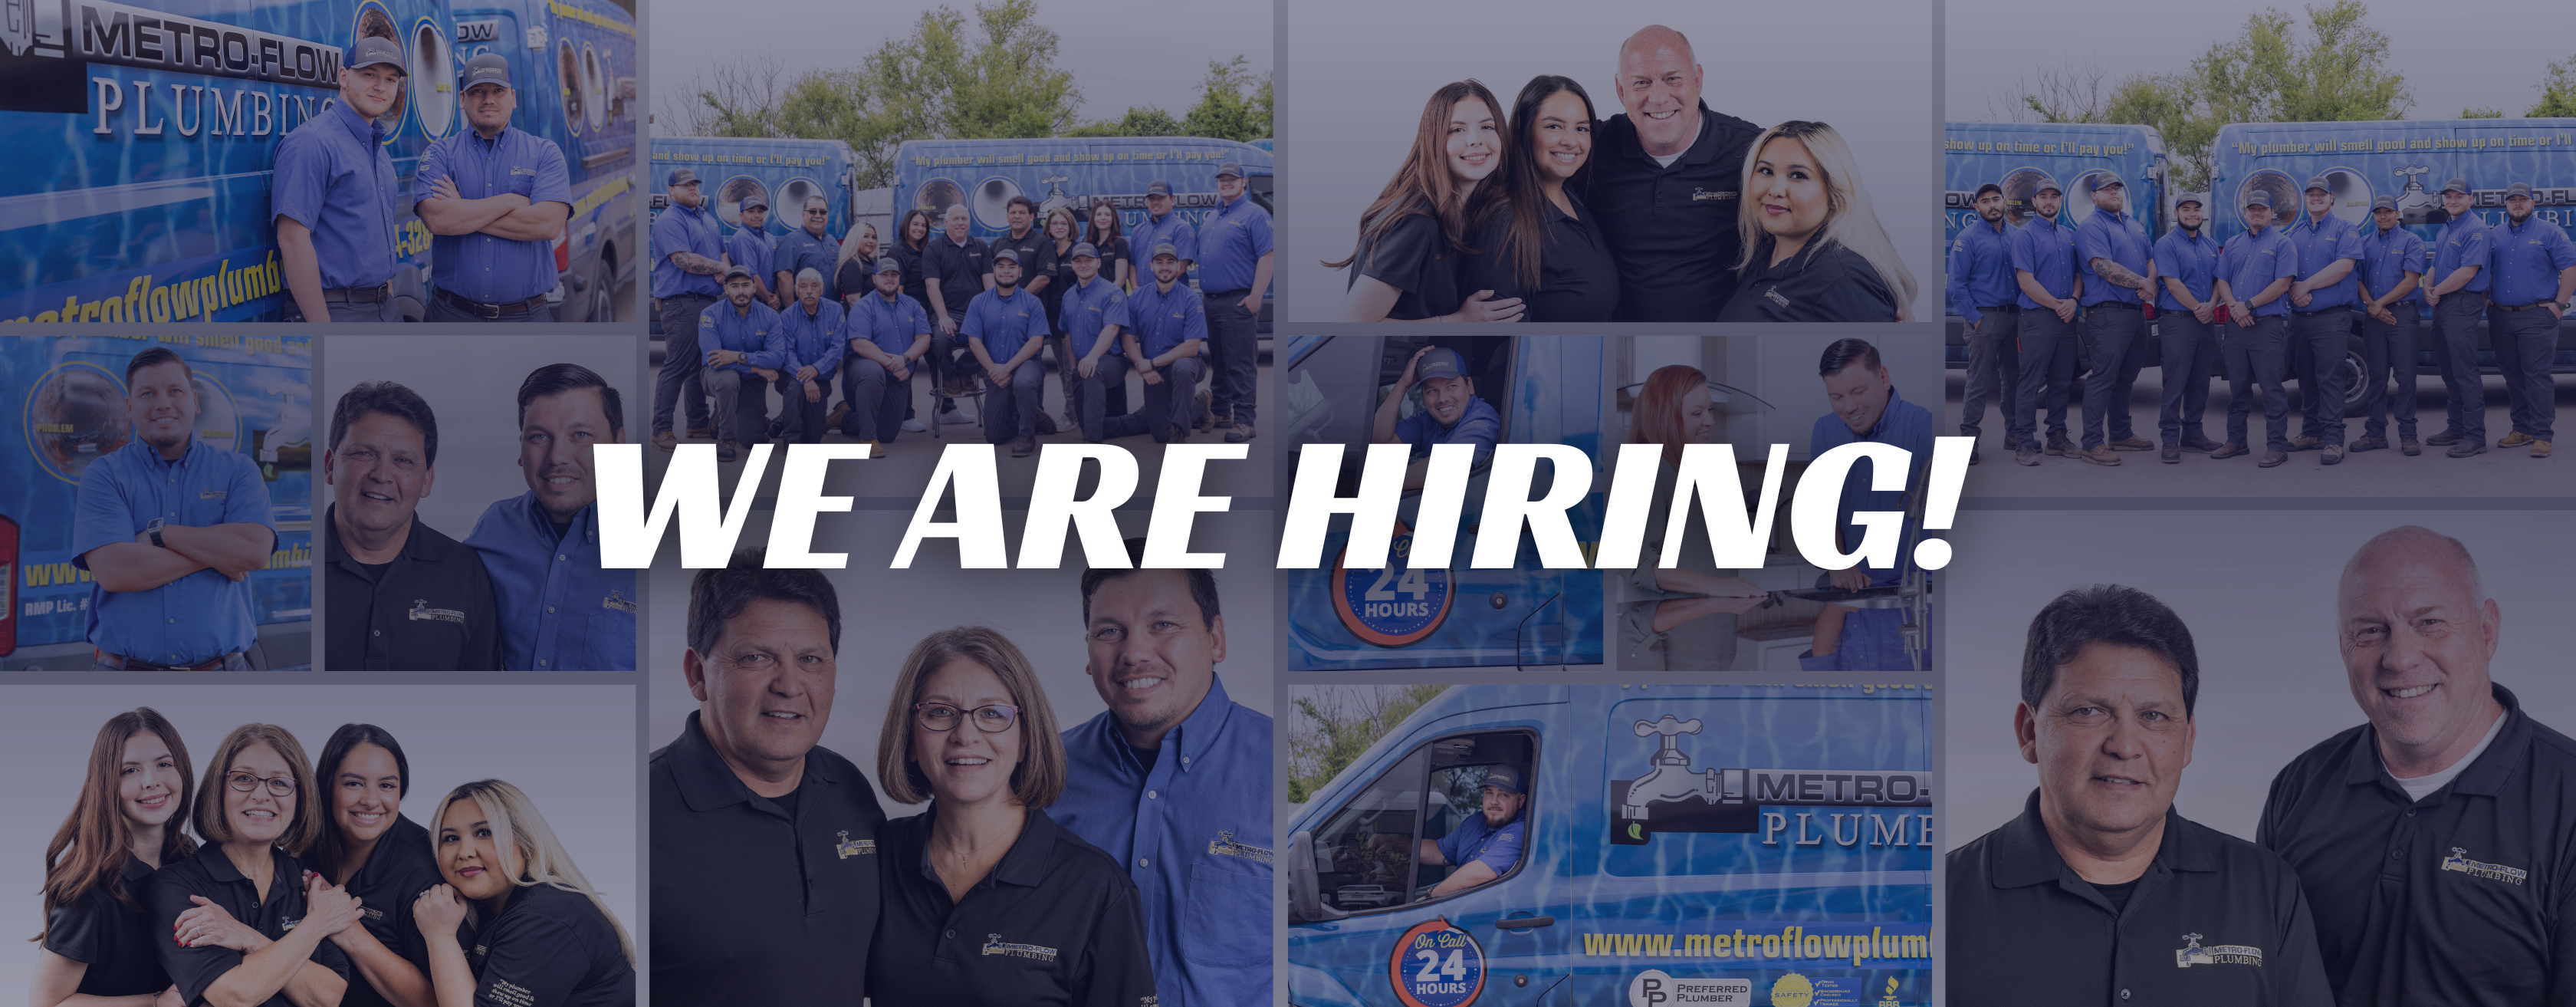 A promotional image featuring a collage of diverse employees from Metroflow Plumbing, with images of staff in uniforms, family-like groups, and service vans, overlaid with the text “Careers Open!” in